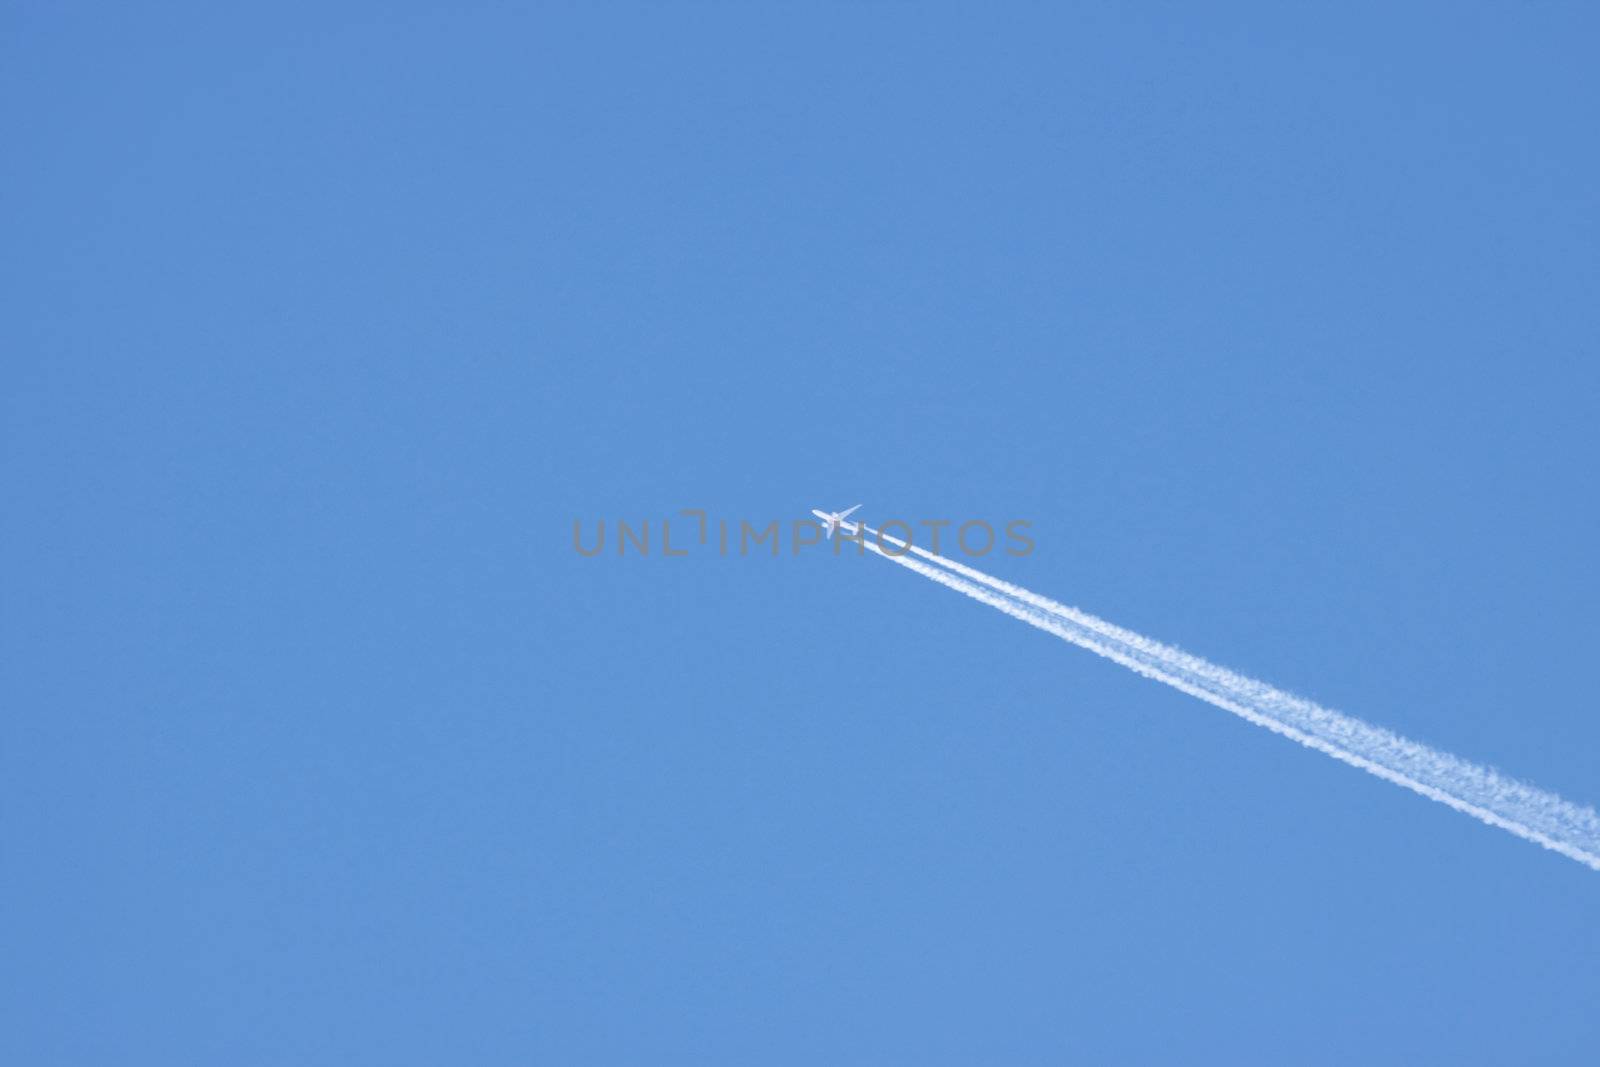 Jet airplane on almost clear blue sky witch some clouds